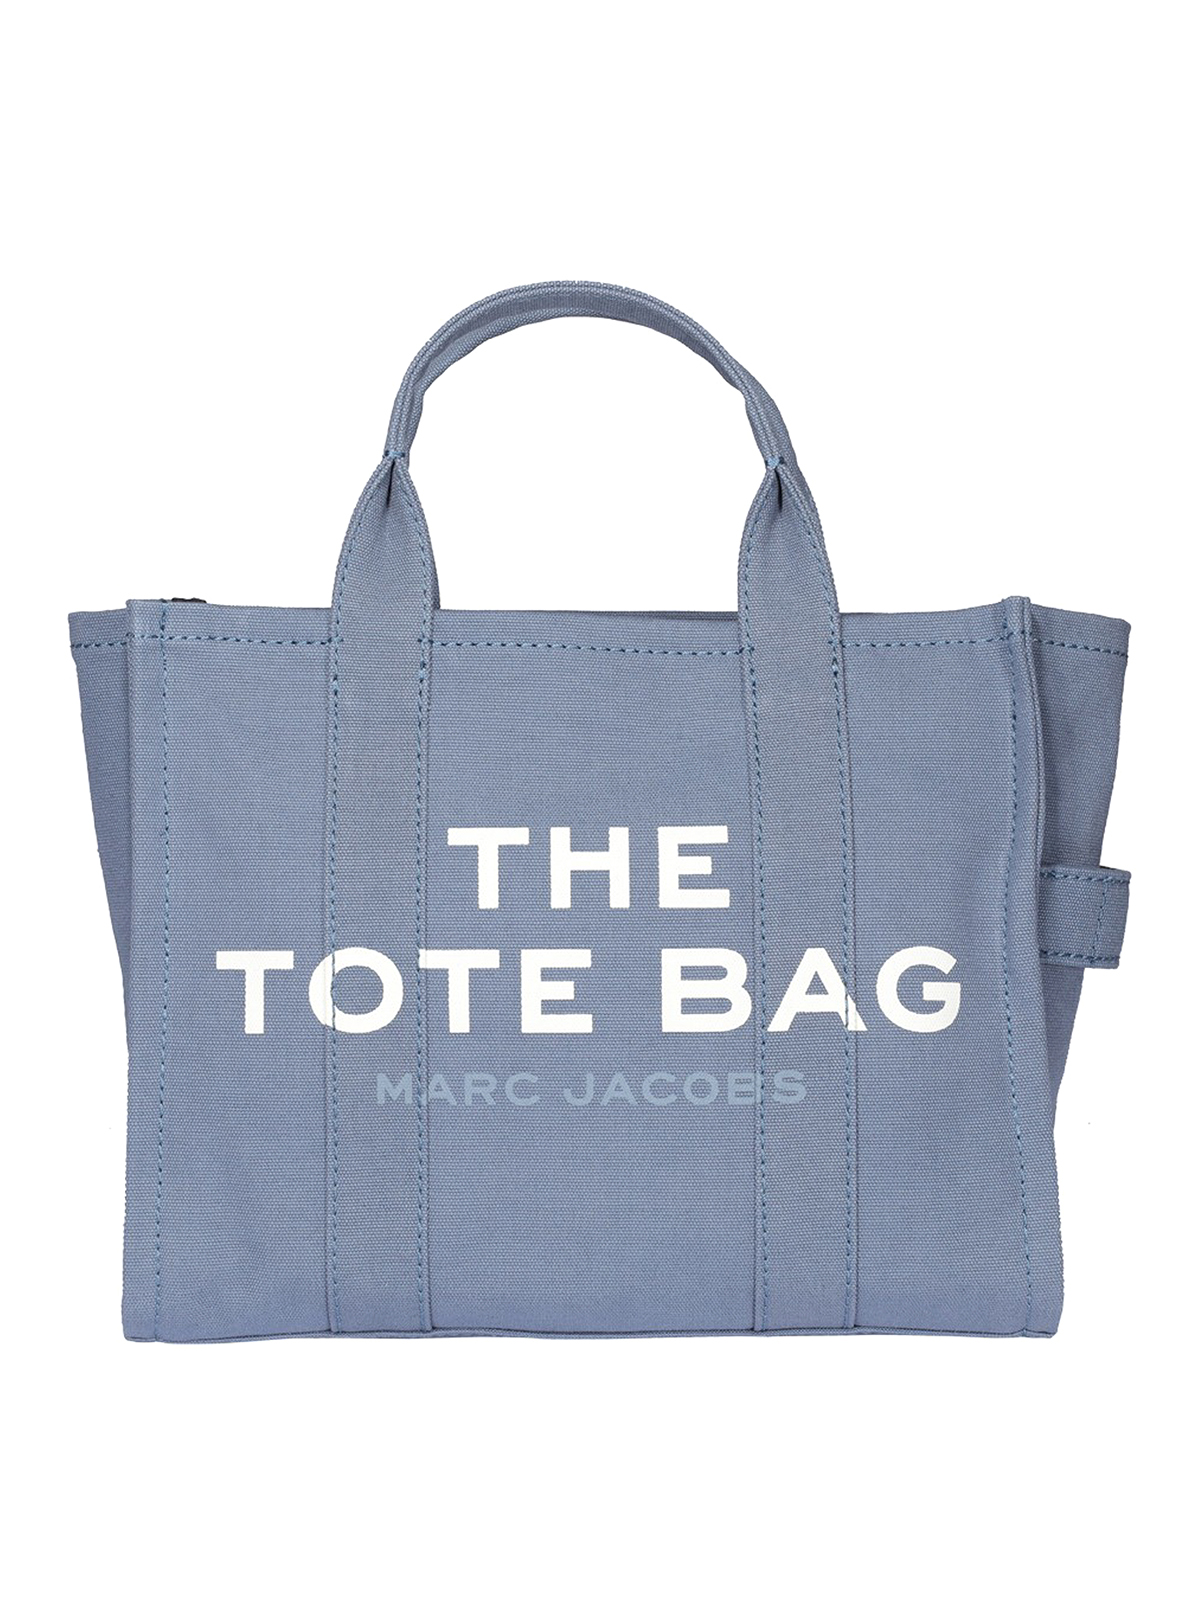 jacobs small tote